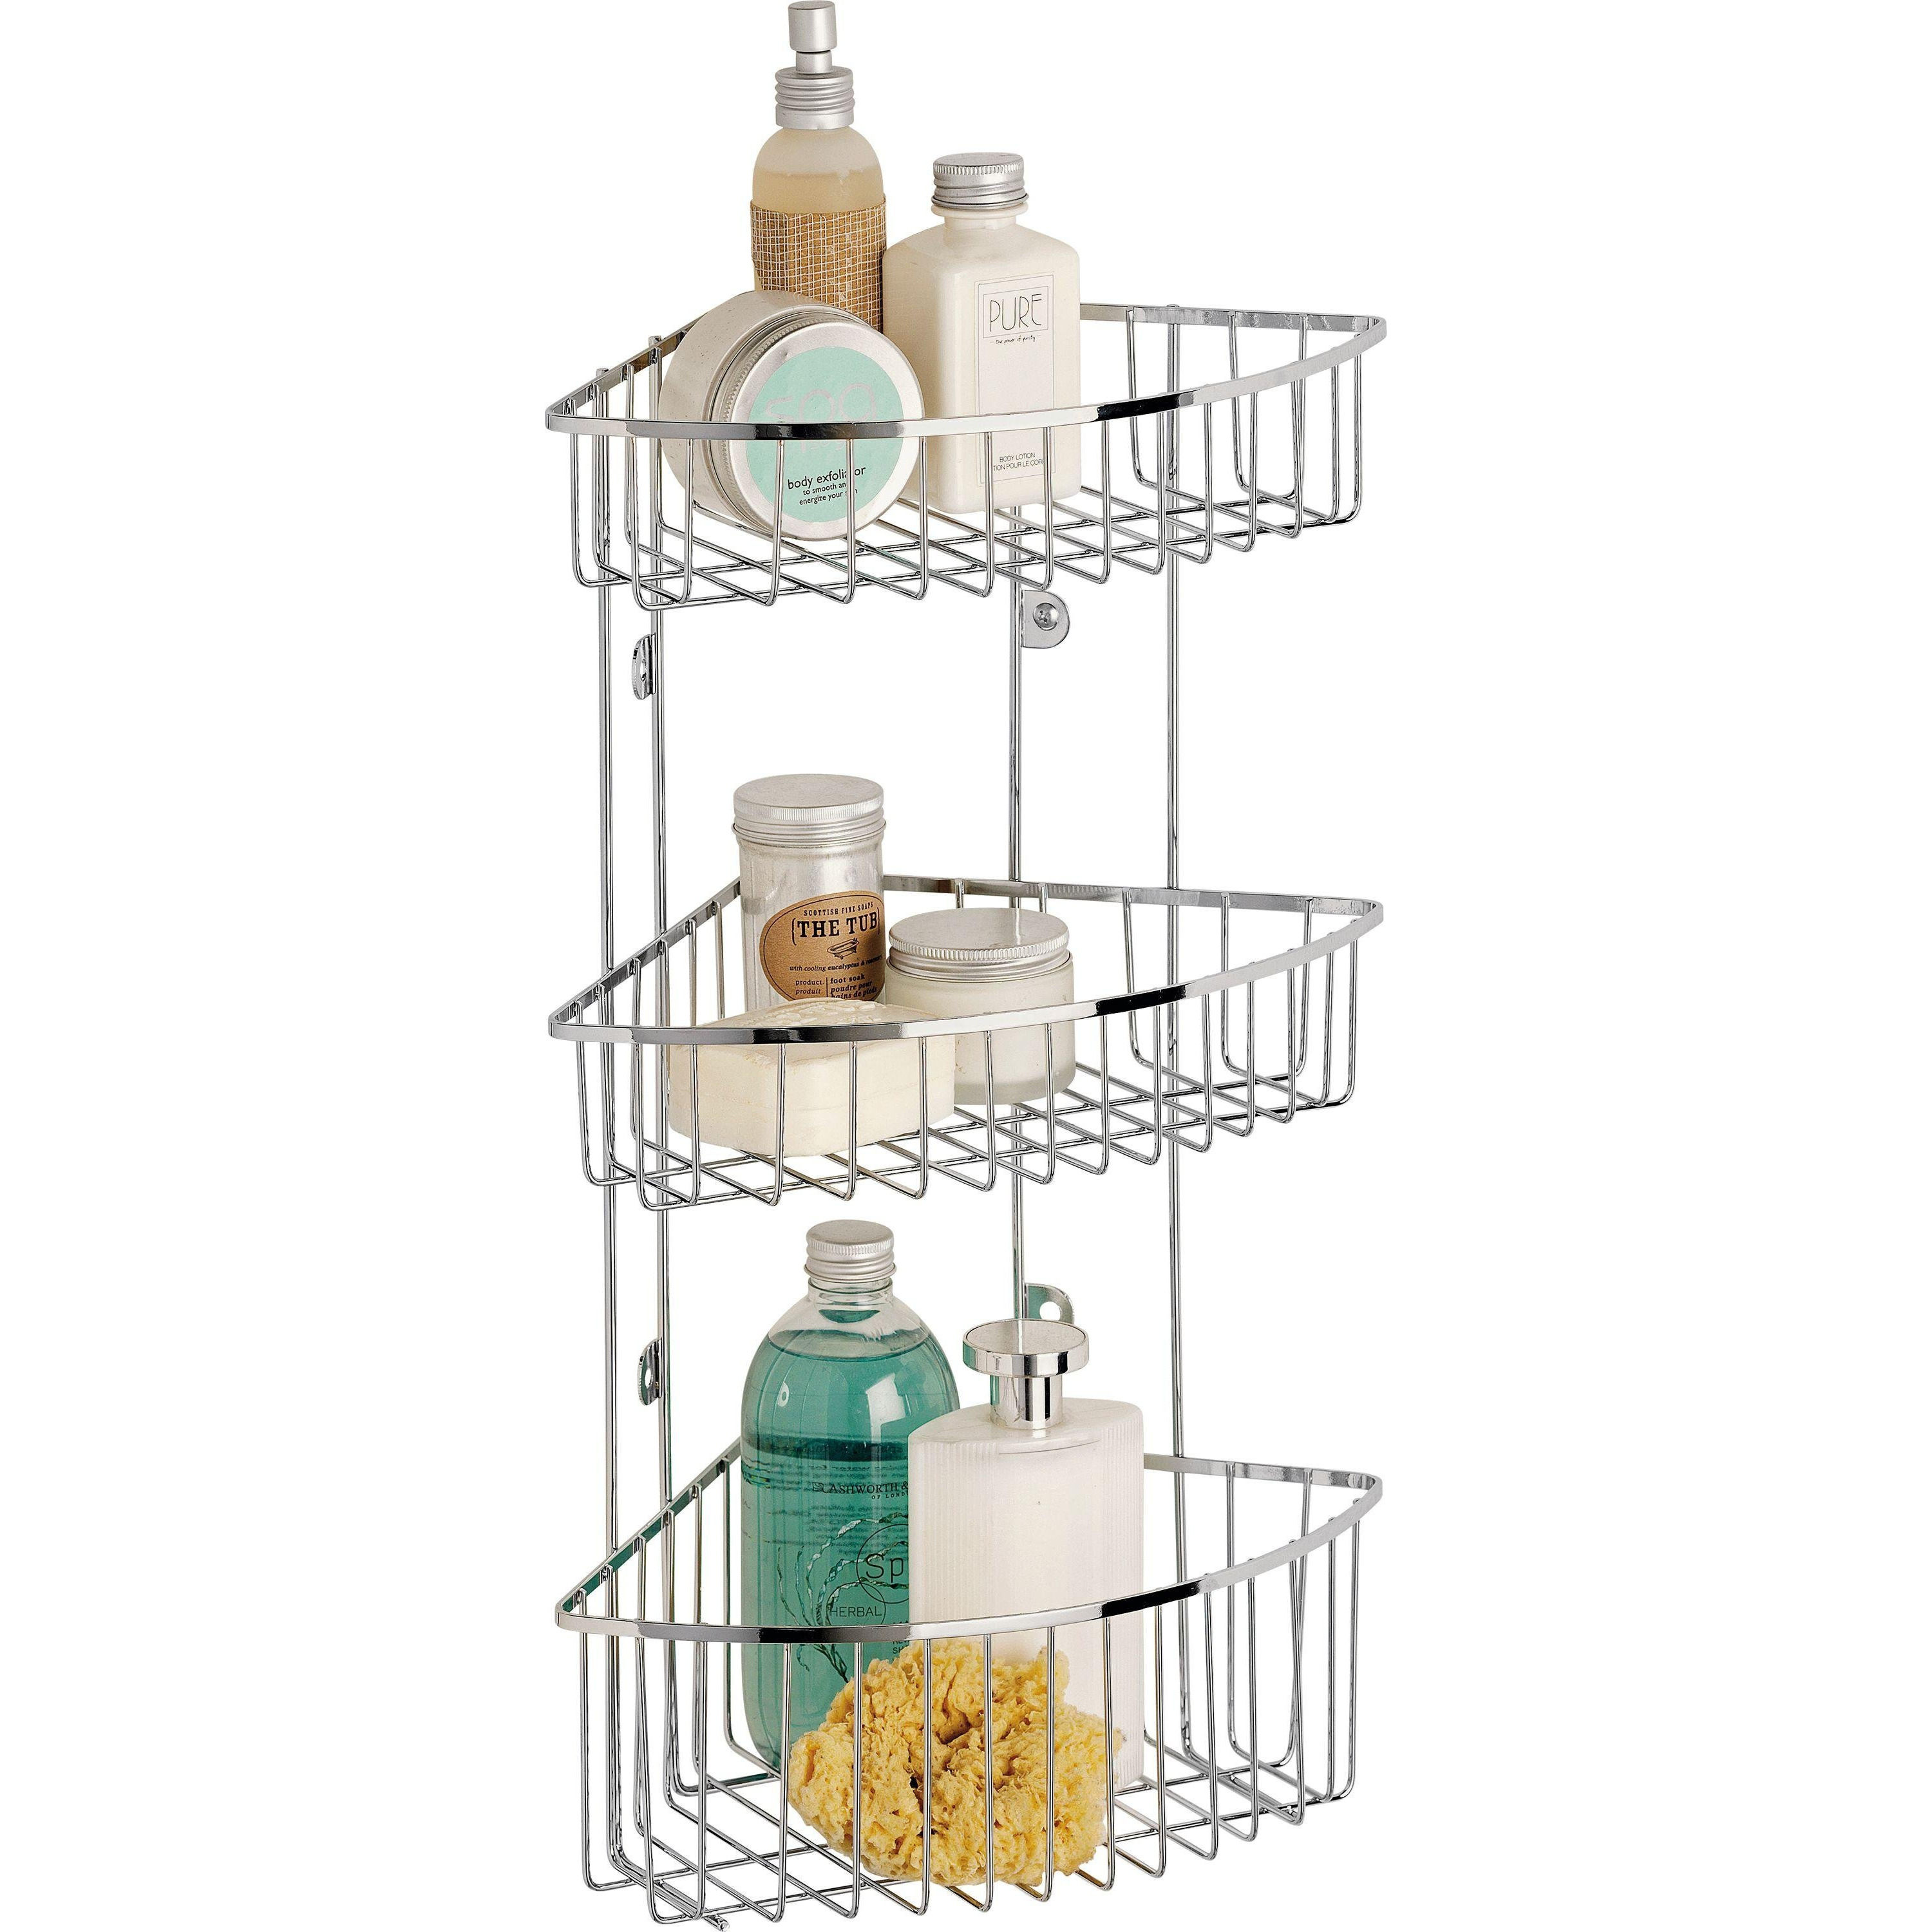 Argos Home 3 Tier Wall Mounted Chrome Shower Caddy - image 1